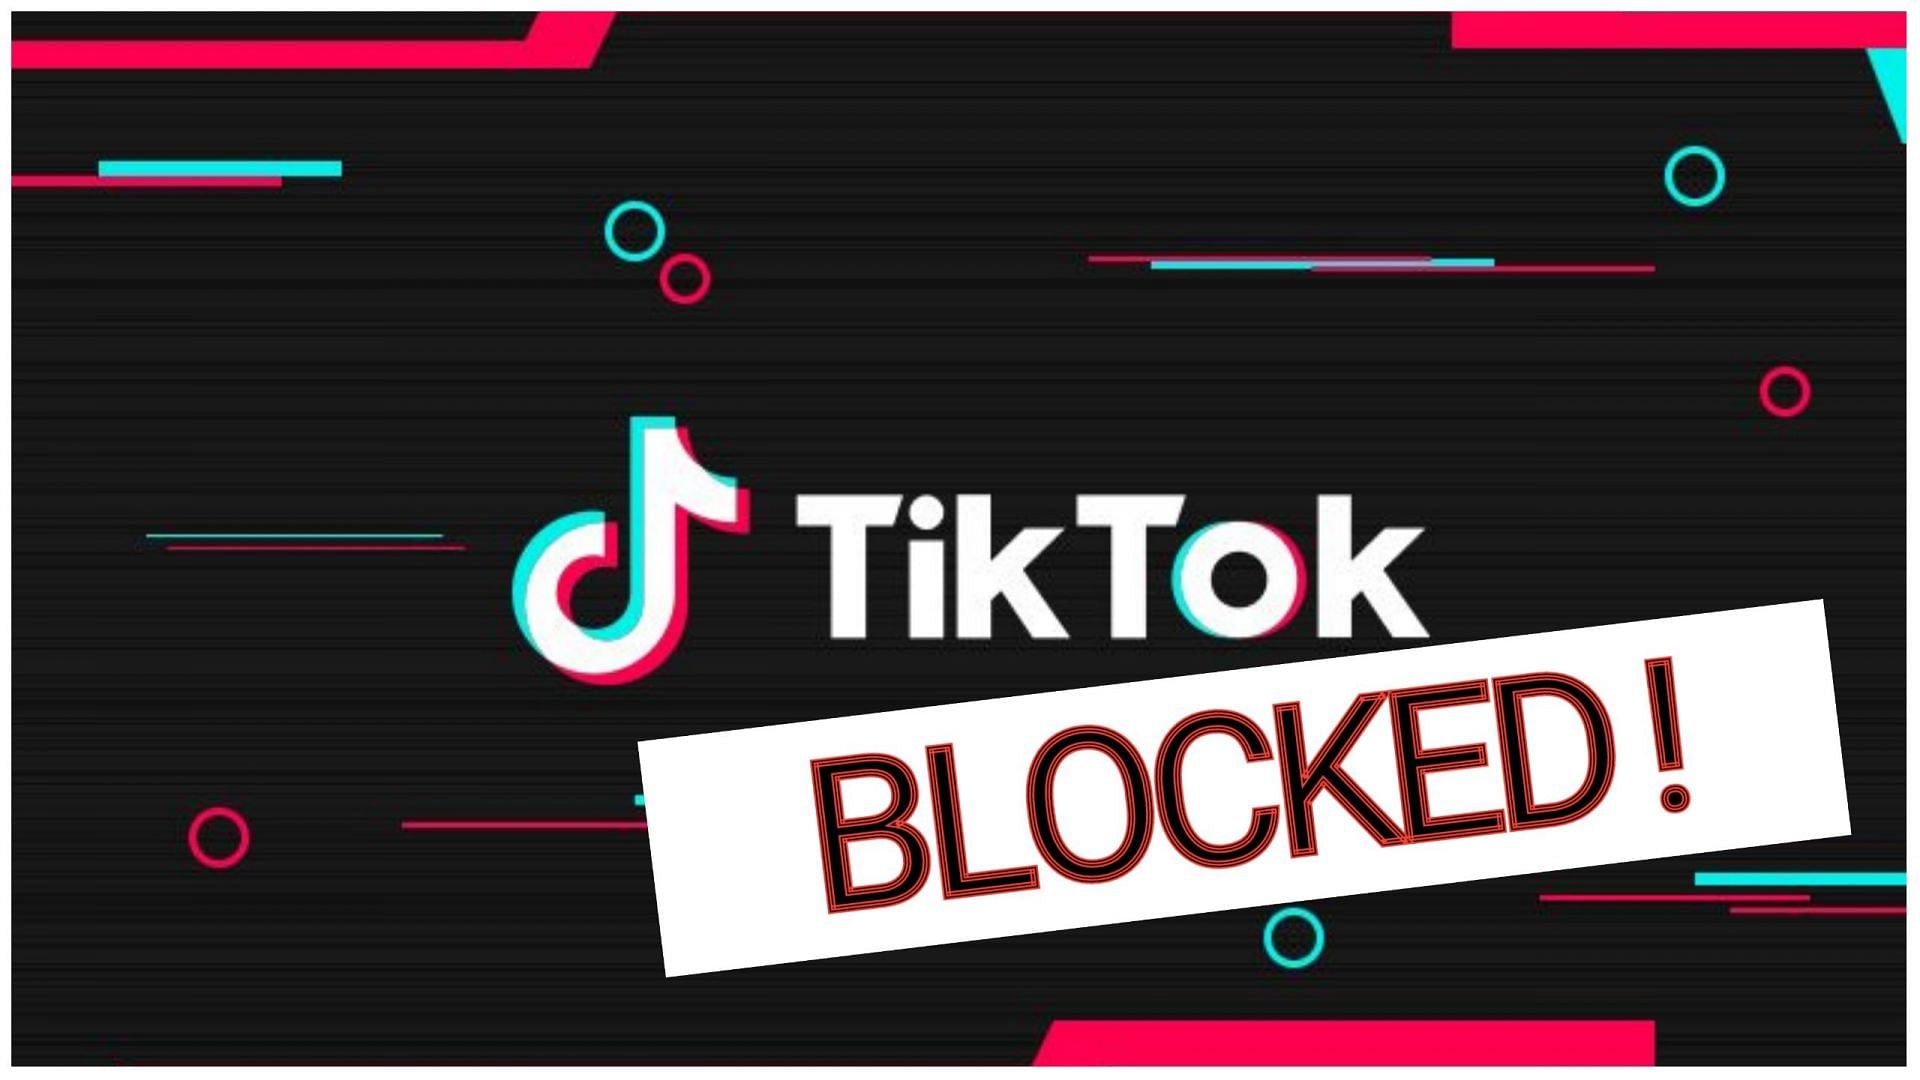 How to block someone on TikTok? Steps explained